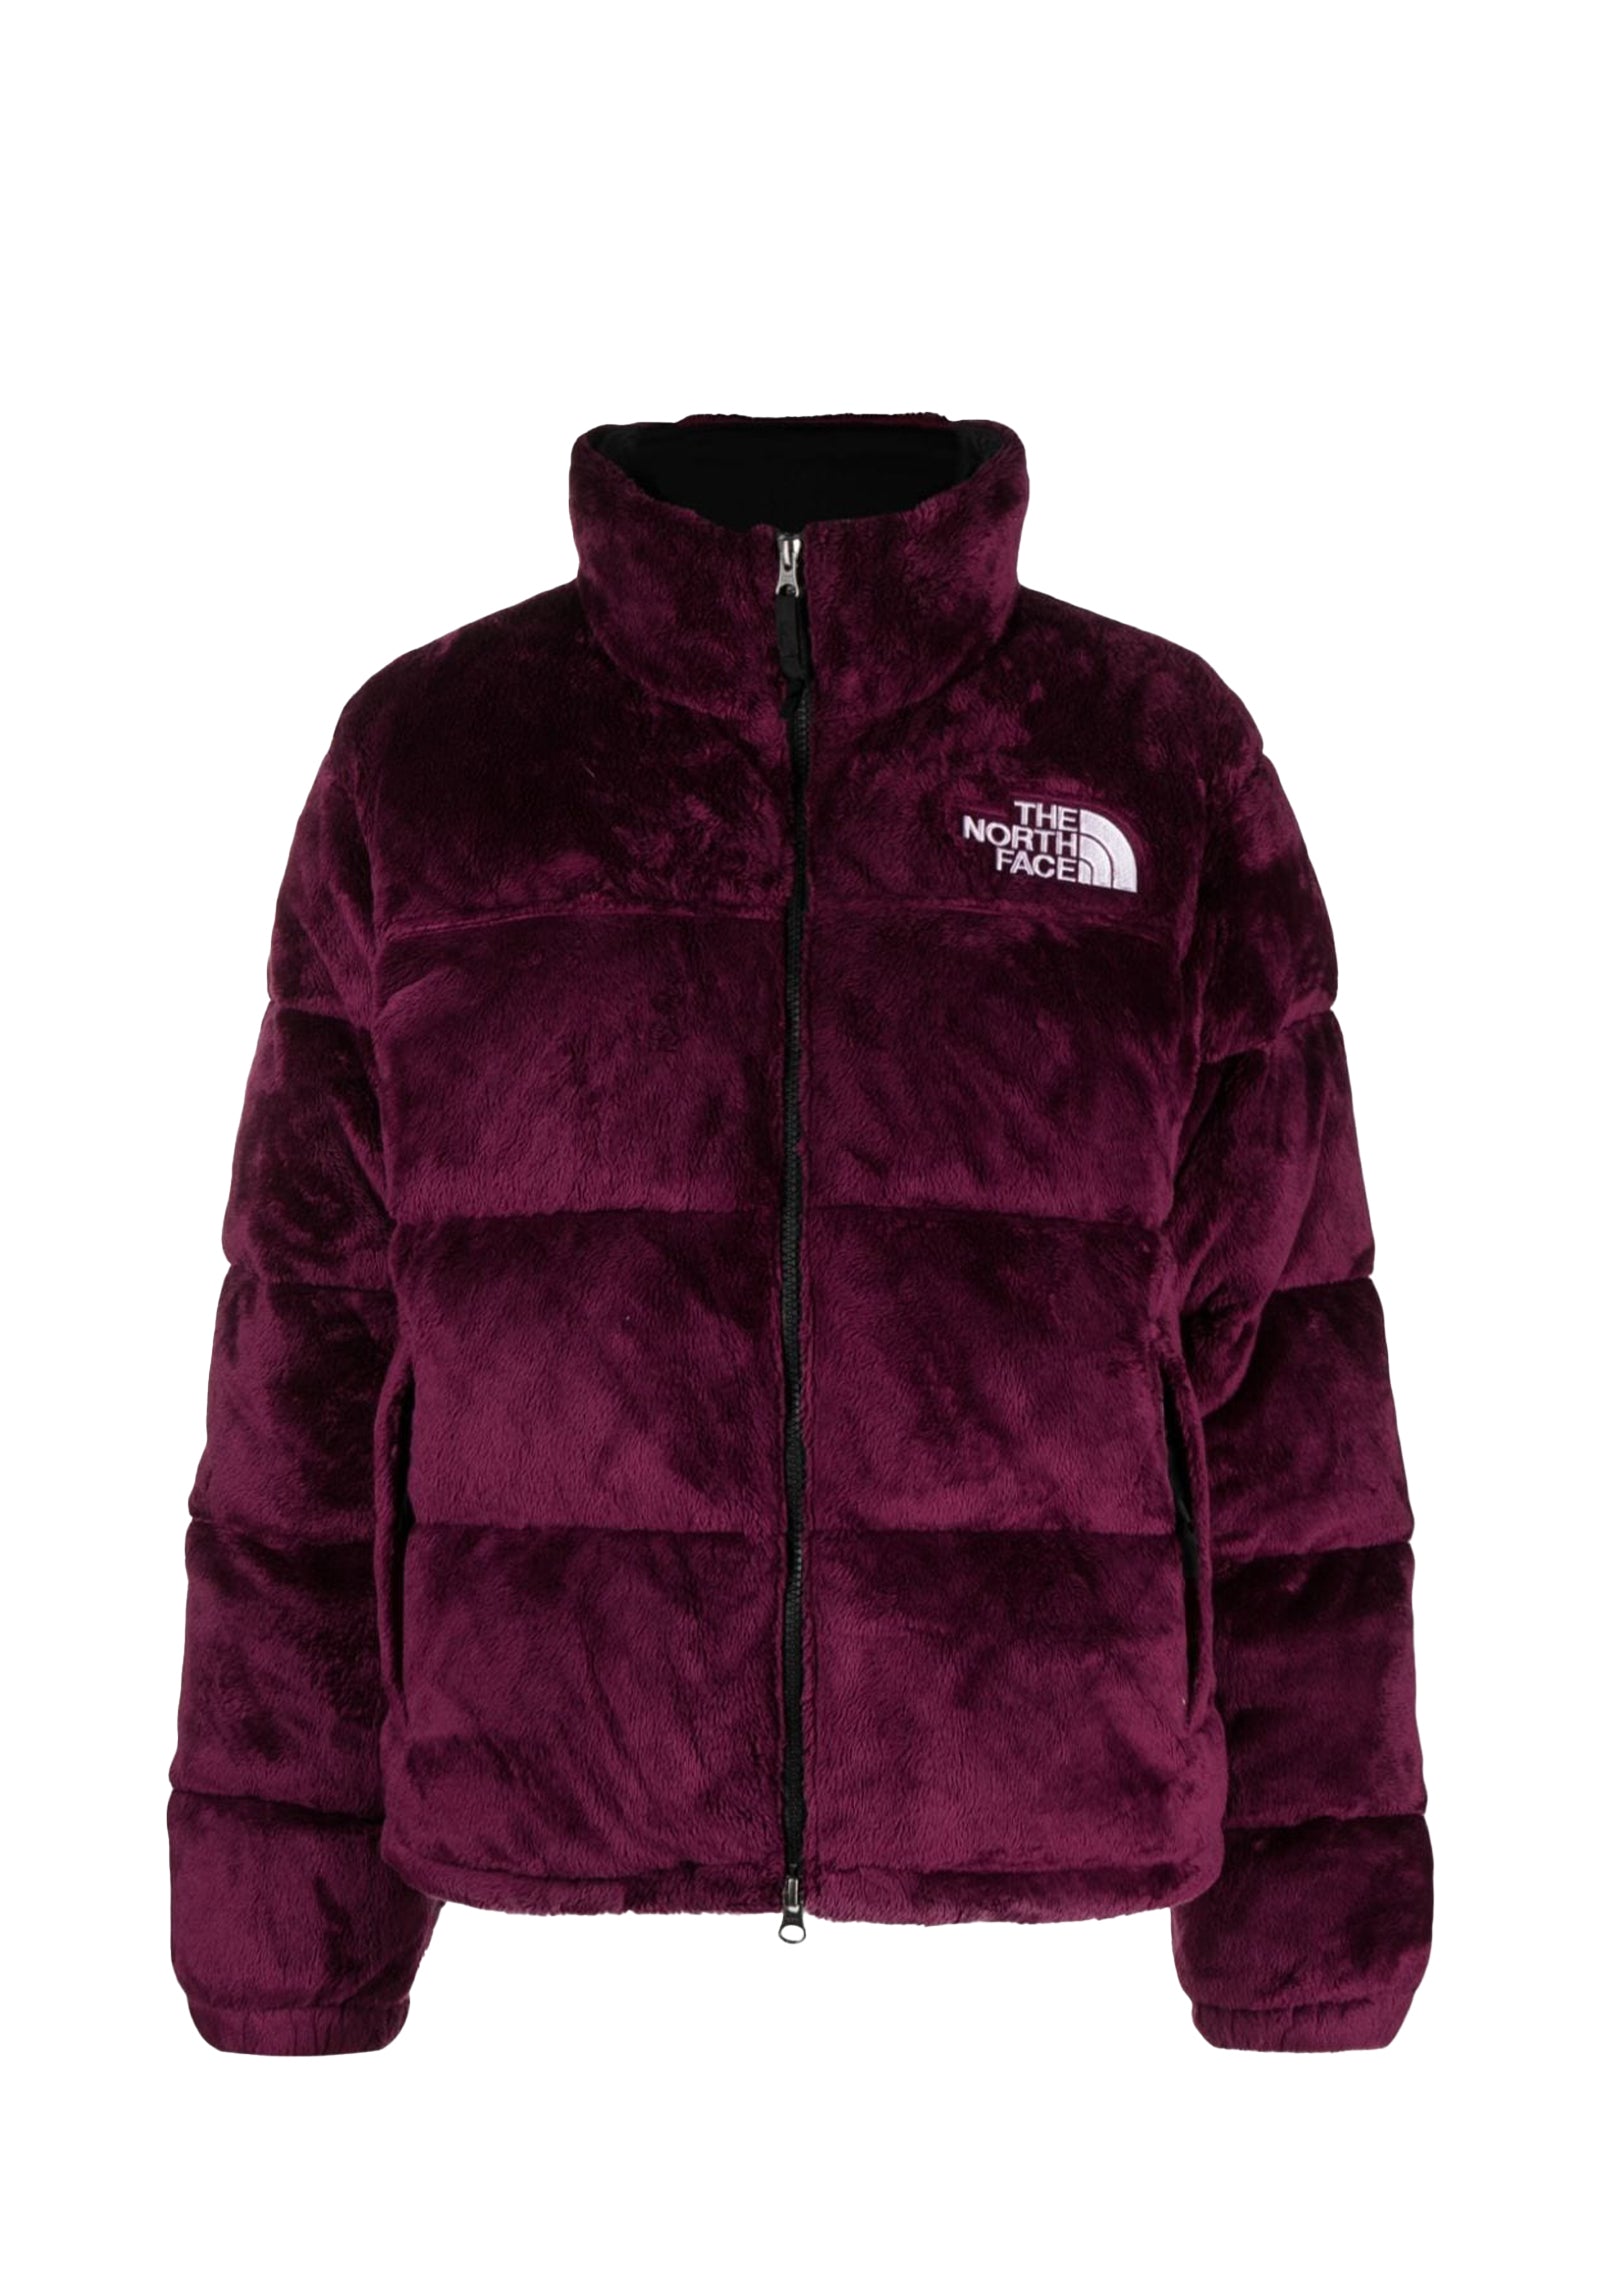 Giacca nuptse in velluto bordeaux